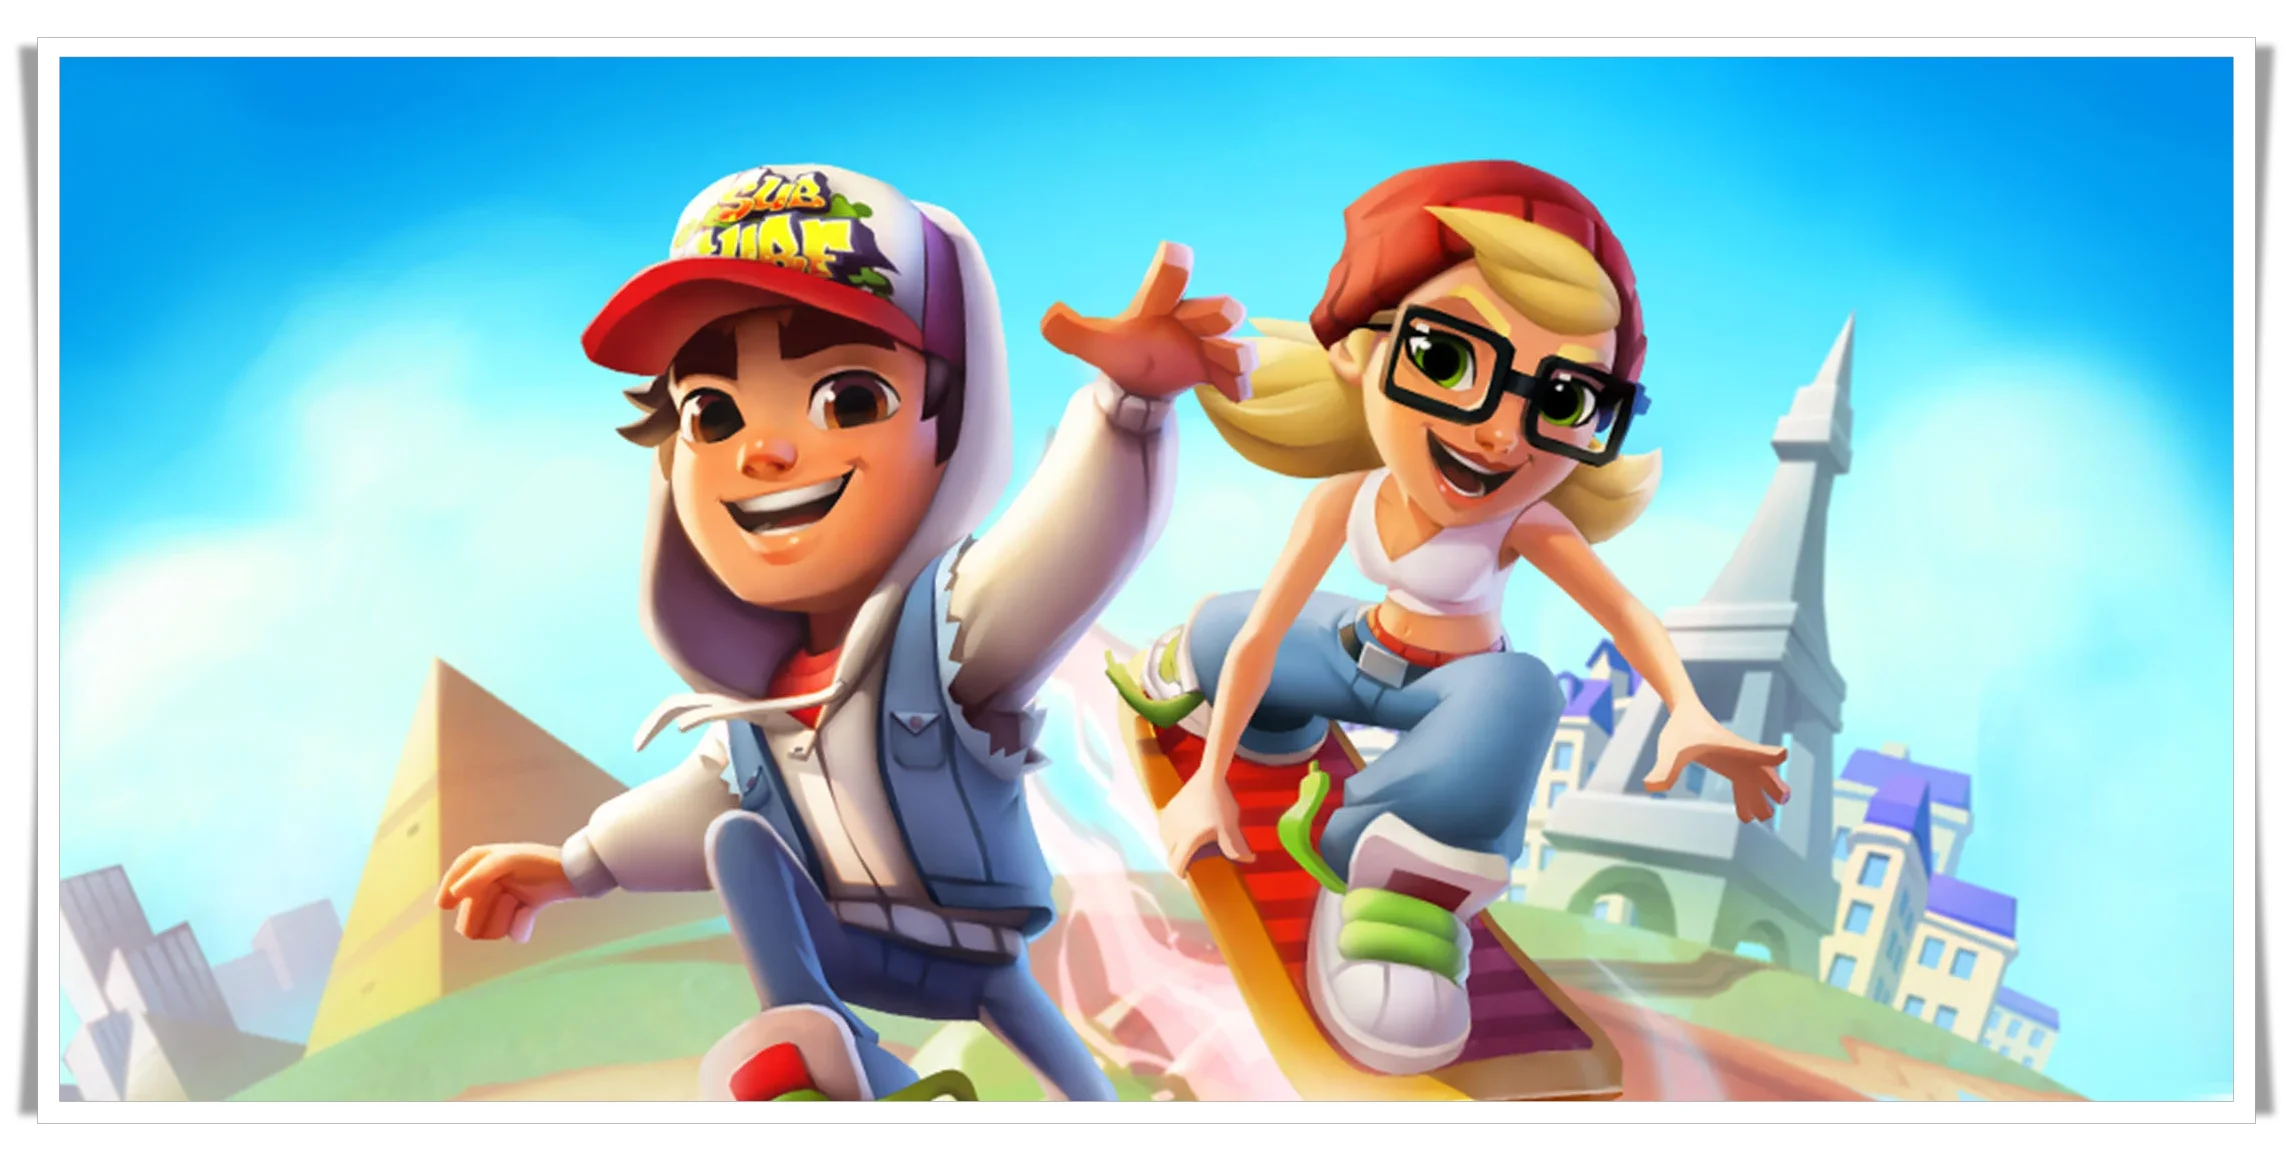 Subway Surfers Mod Apk 3.22.2 (Unlimited Characters/Keys/Coins)